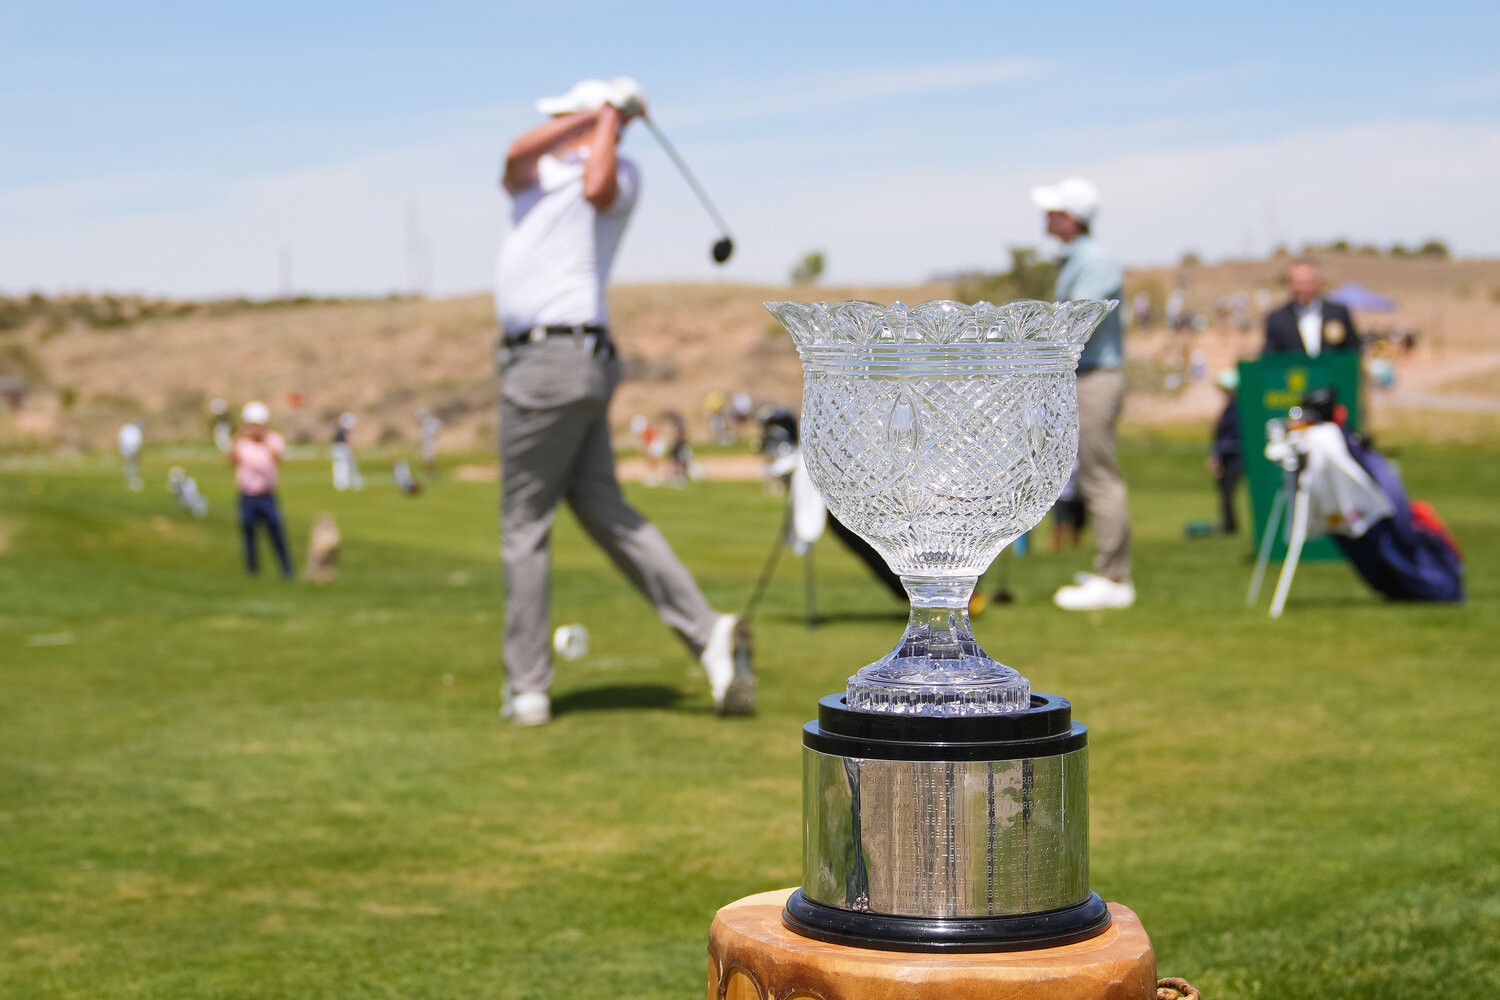 SANTA ANA PUEBLO, NM - APRIL 30: The Walter Hagen Cup on display on the first hole during the first round of the 55th PGA Professional Championship at Twin Warriors Golf Club on Sunday, April 30, 2023 in Santa Ana Pueblo, New Mexico. (Photo by Darren Carroll/PGA of America)